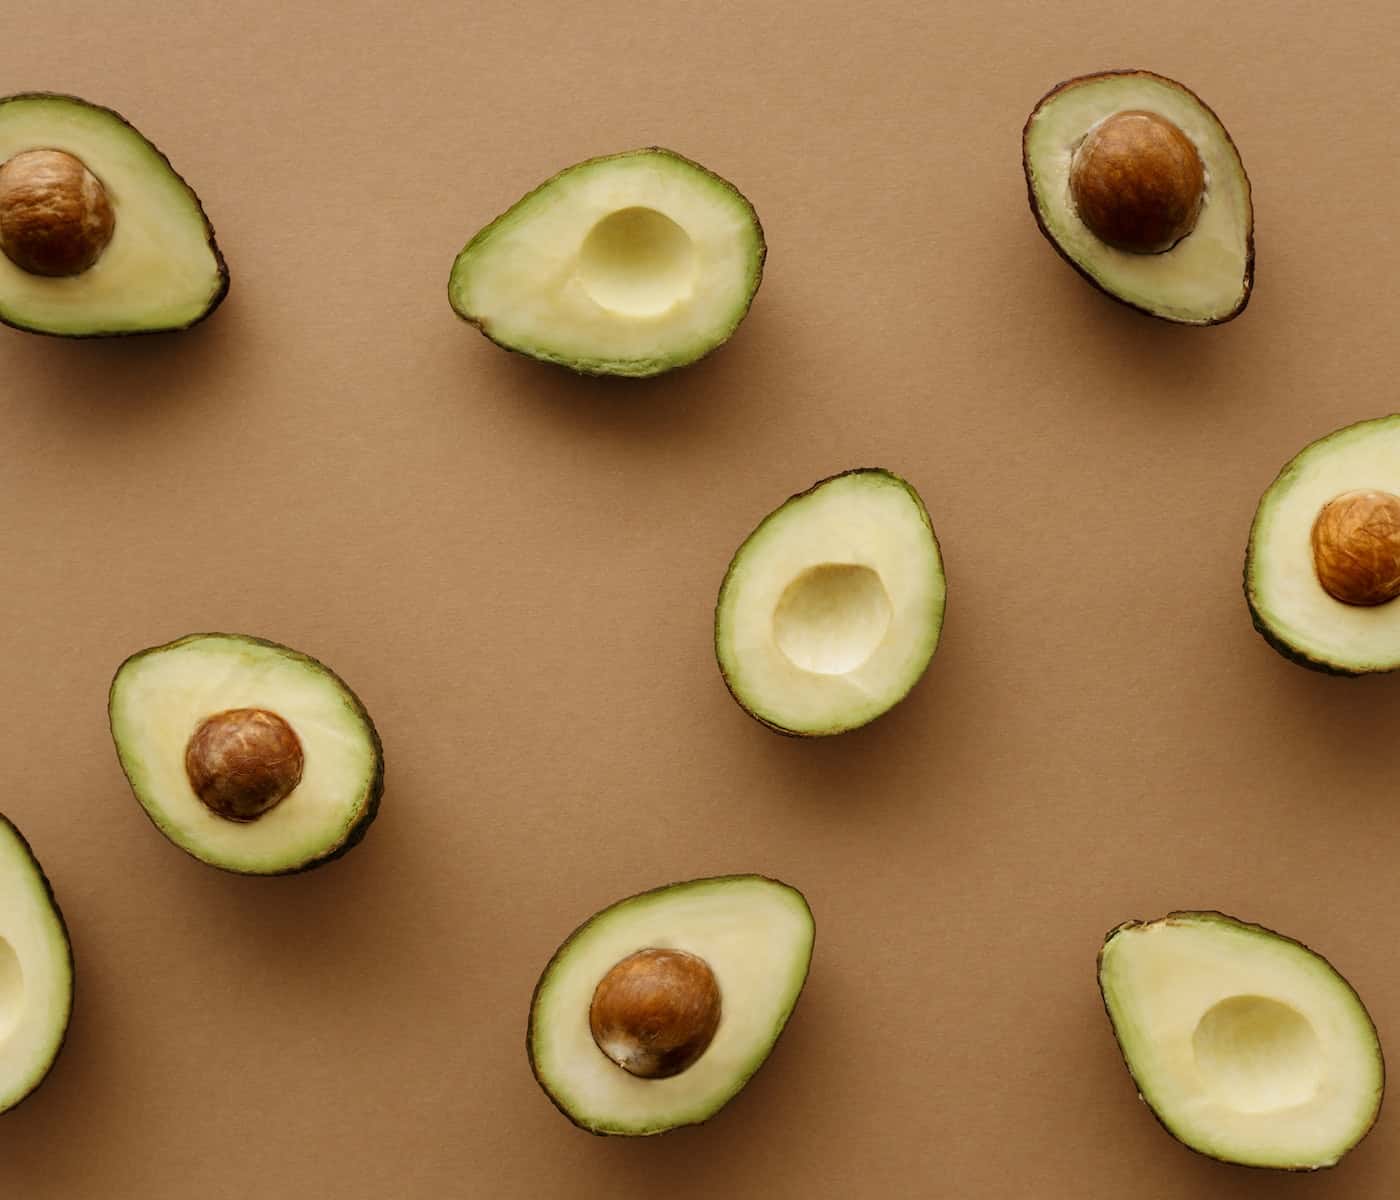 10 Remarkable Health Benefits of Avocado Seeds That Everyone Should Know